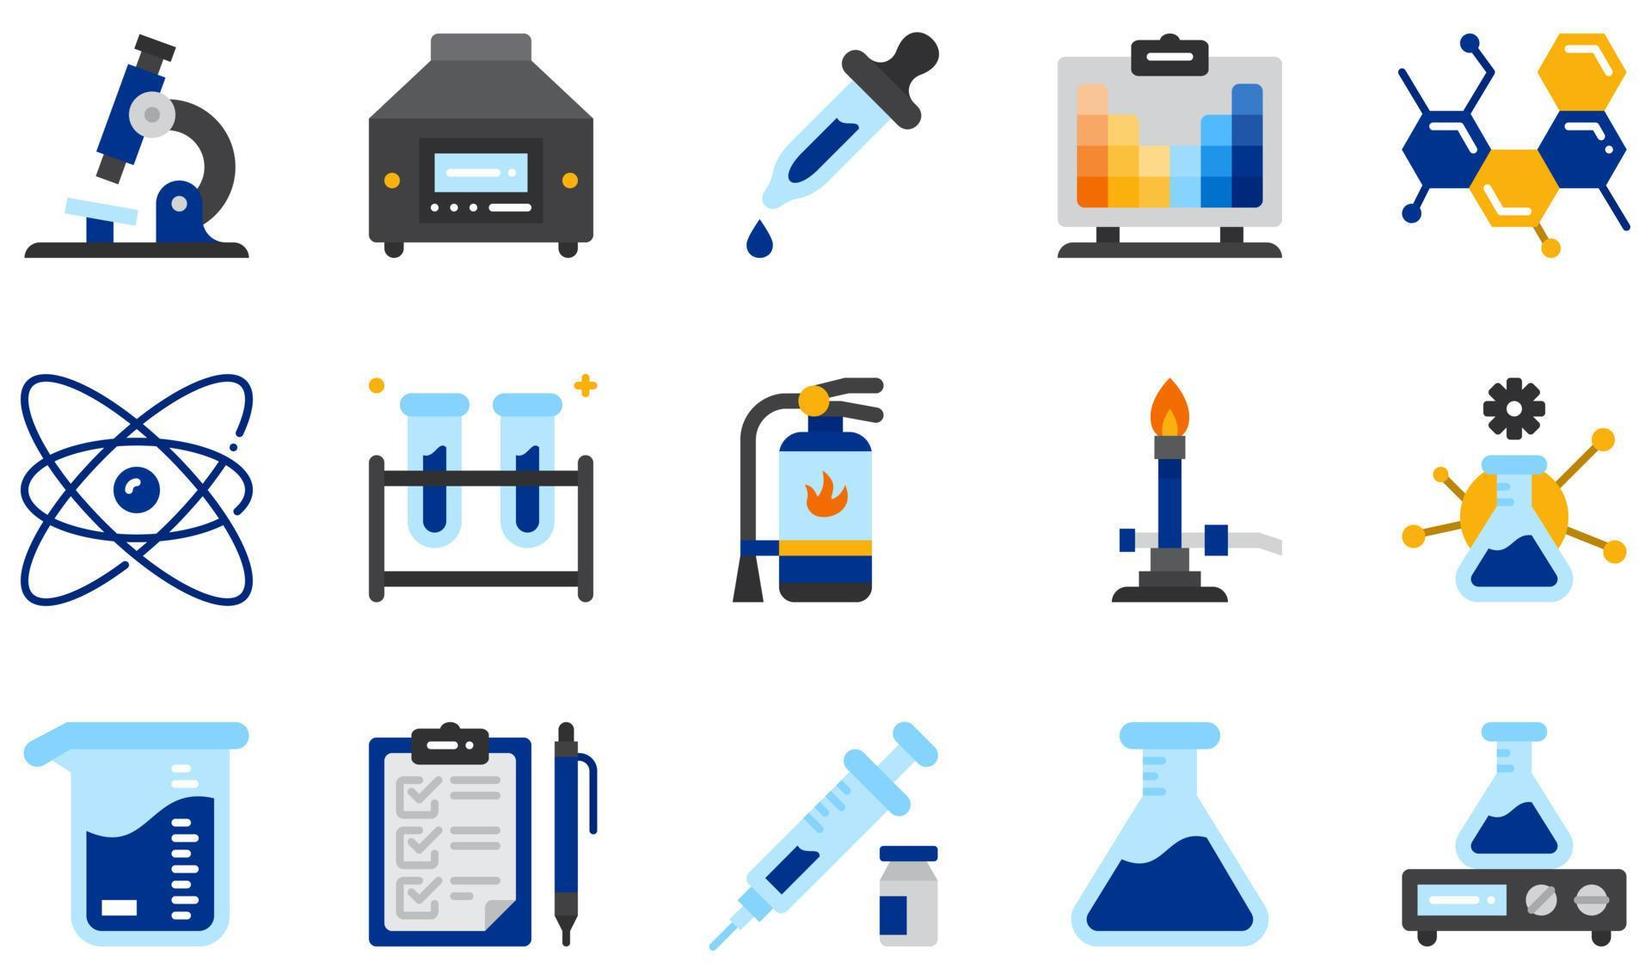 Set of Vector Icons Related to Chemistry Lab. Contains such Icons as Microscope, Centrifuge, Dropper, Molecular, Atom, Beaker and more.